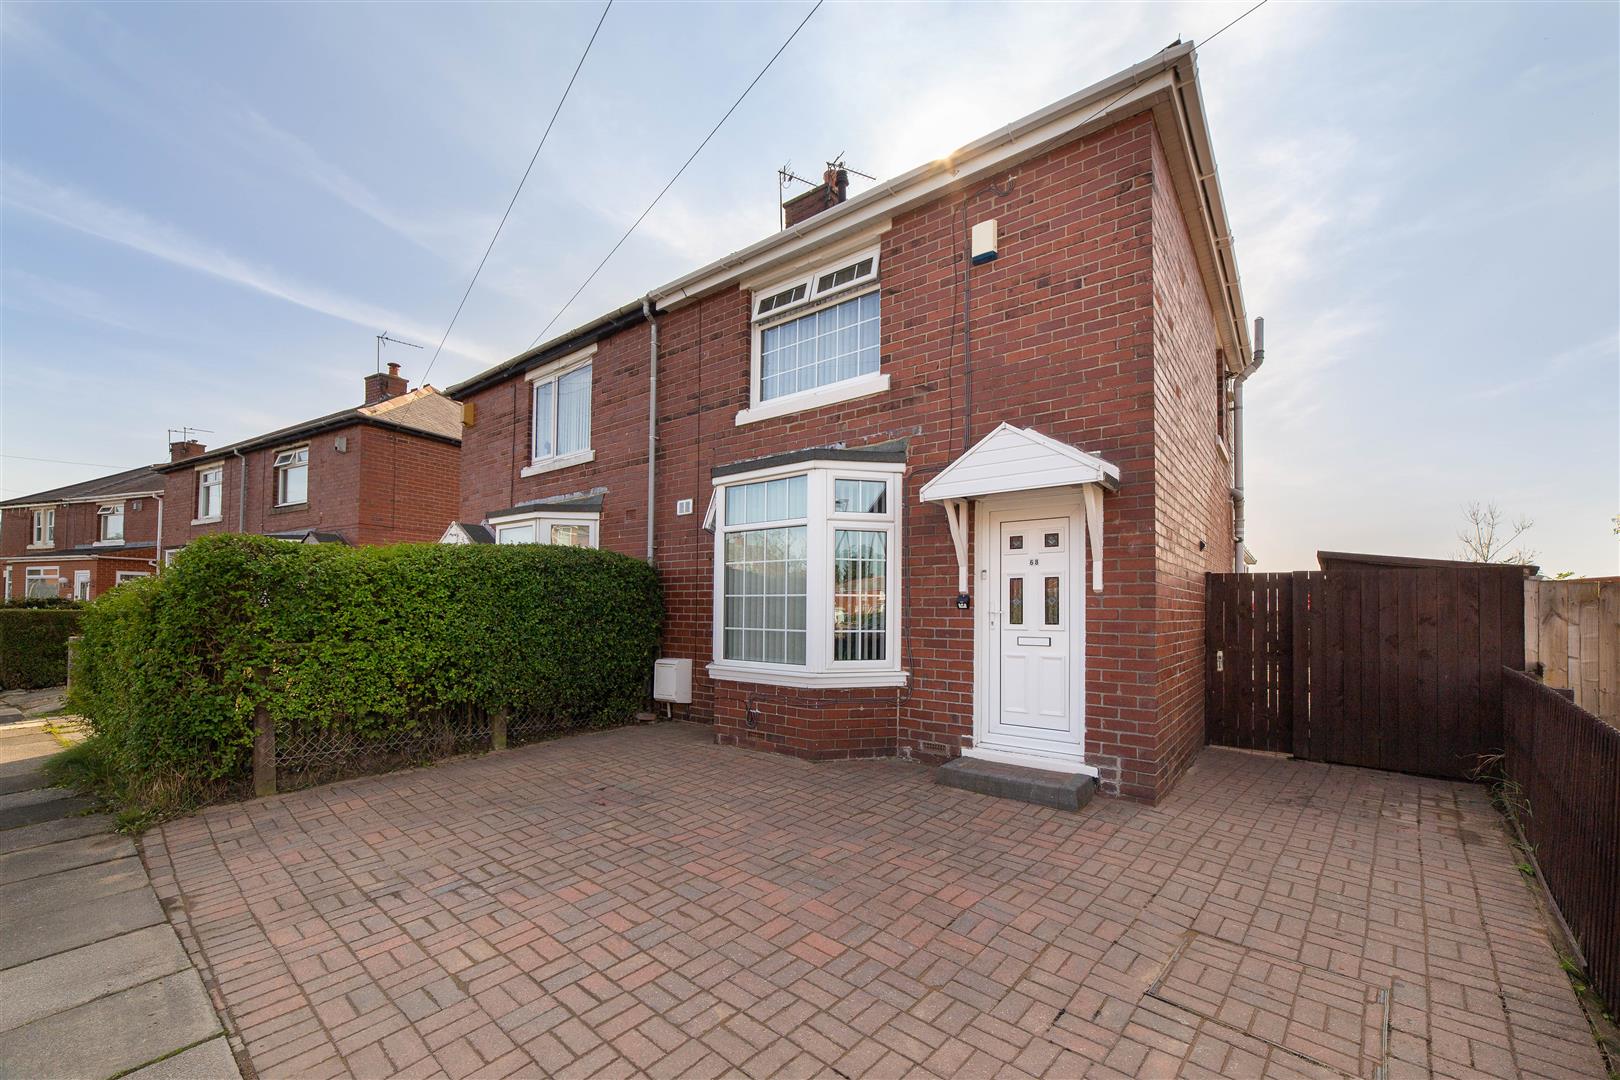 2 bed semi-detached house for sale in O'Hanlon Crescent, Wallsend - Property Image 1